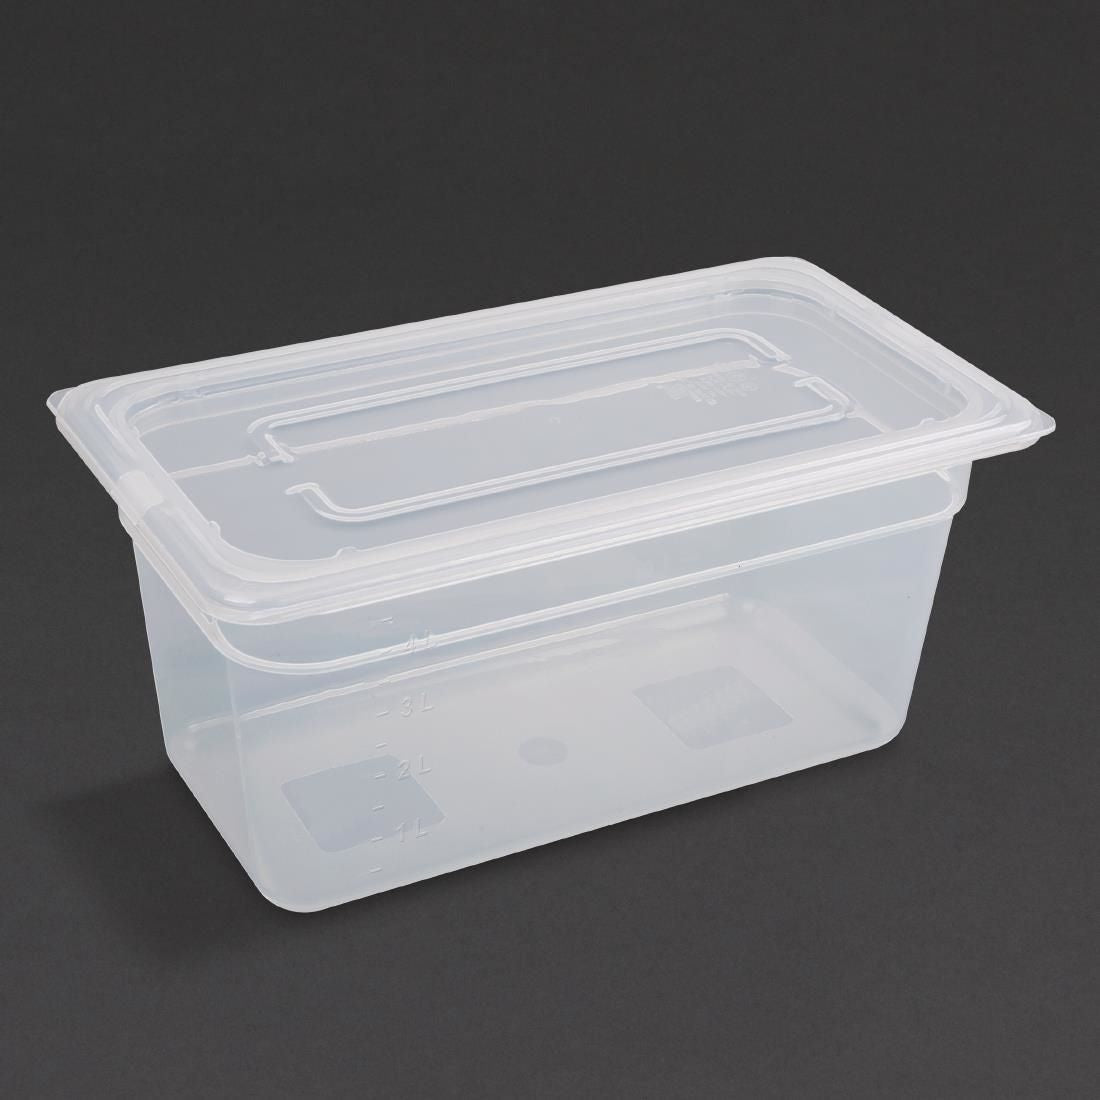 GJ520 Vogue Polypropylene 1/3 Gastronorm Container with Lid 150mm (Pack of 4) JD Catering Equipment Solutions Ltd